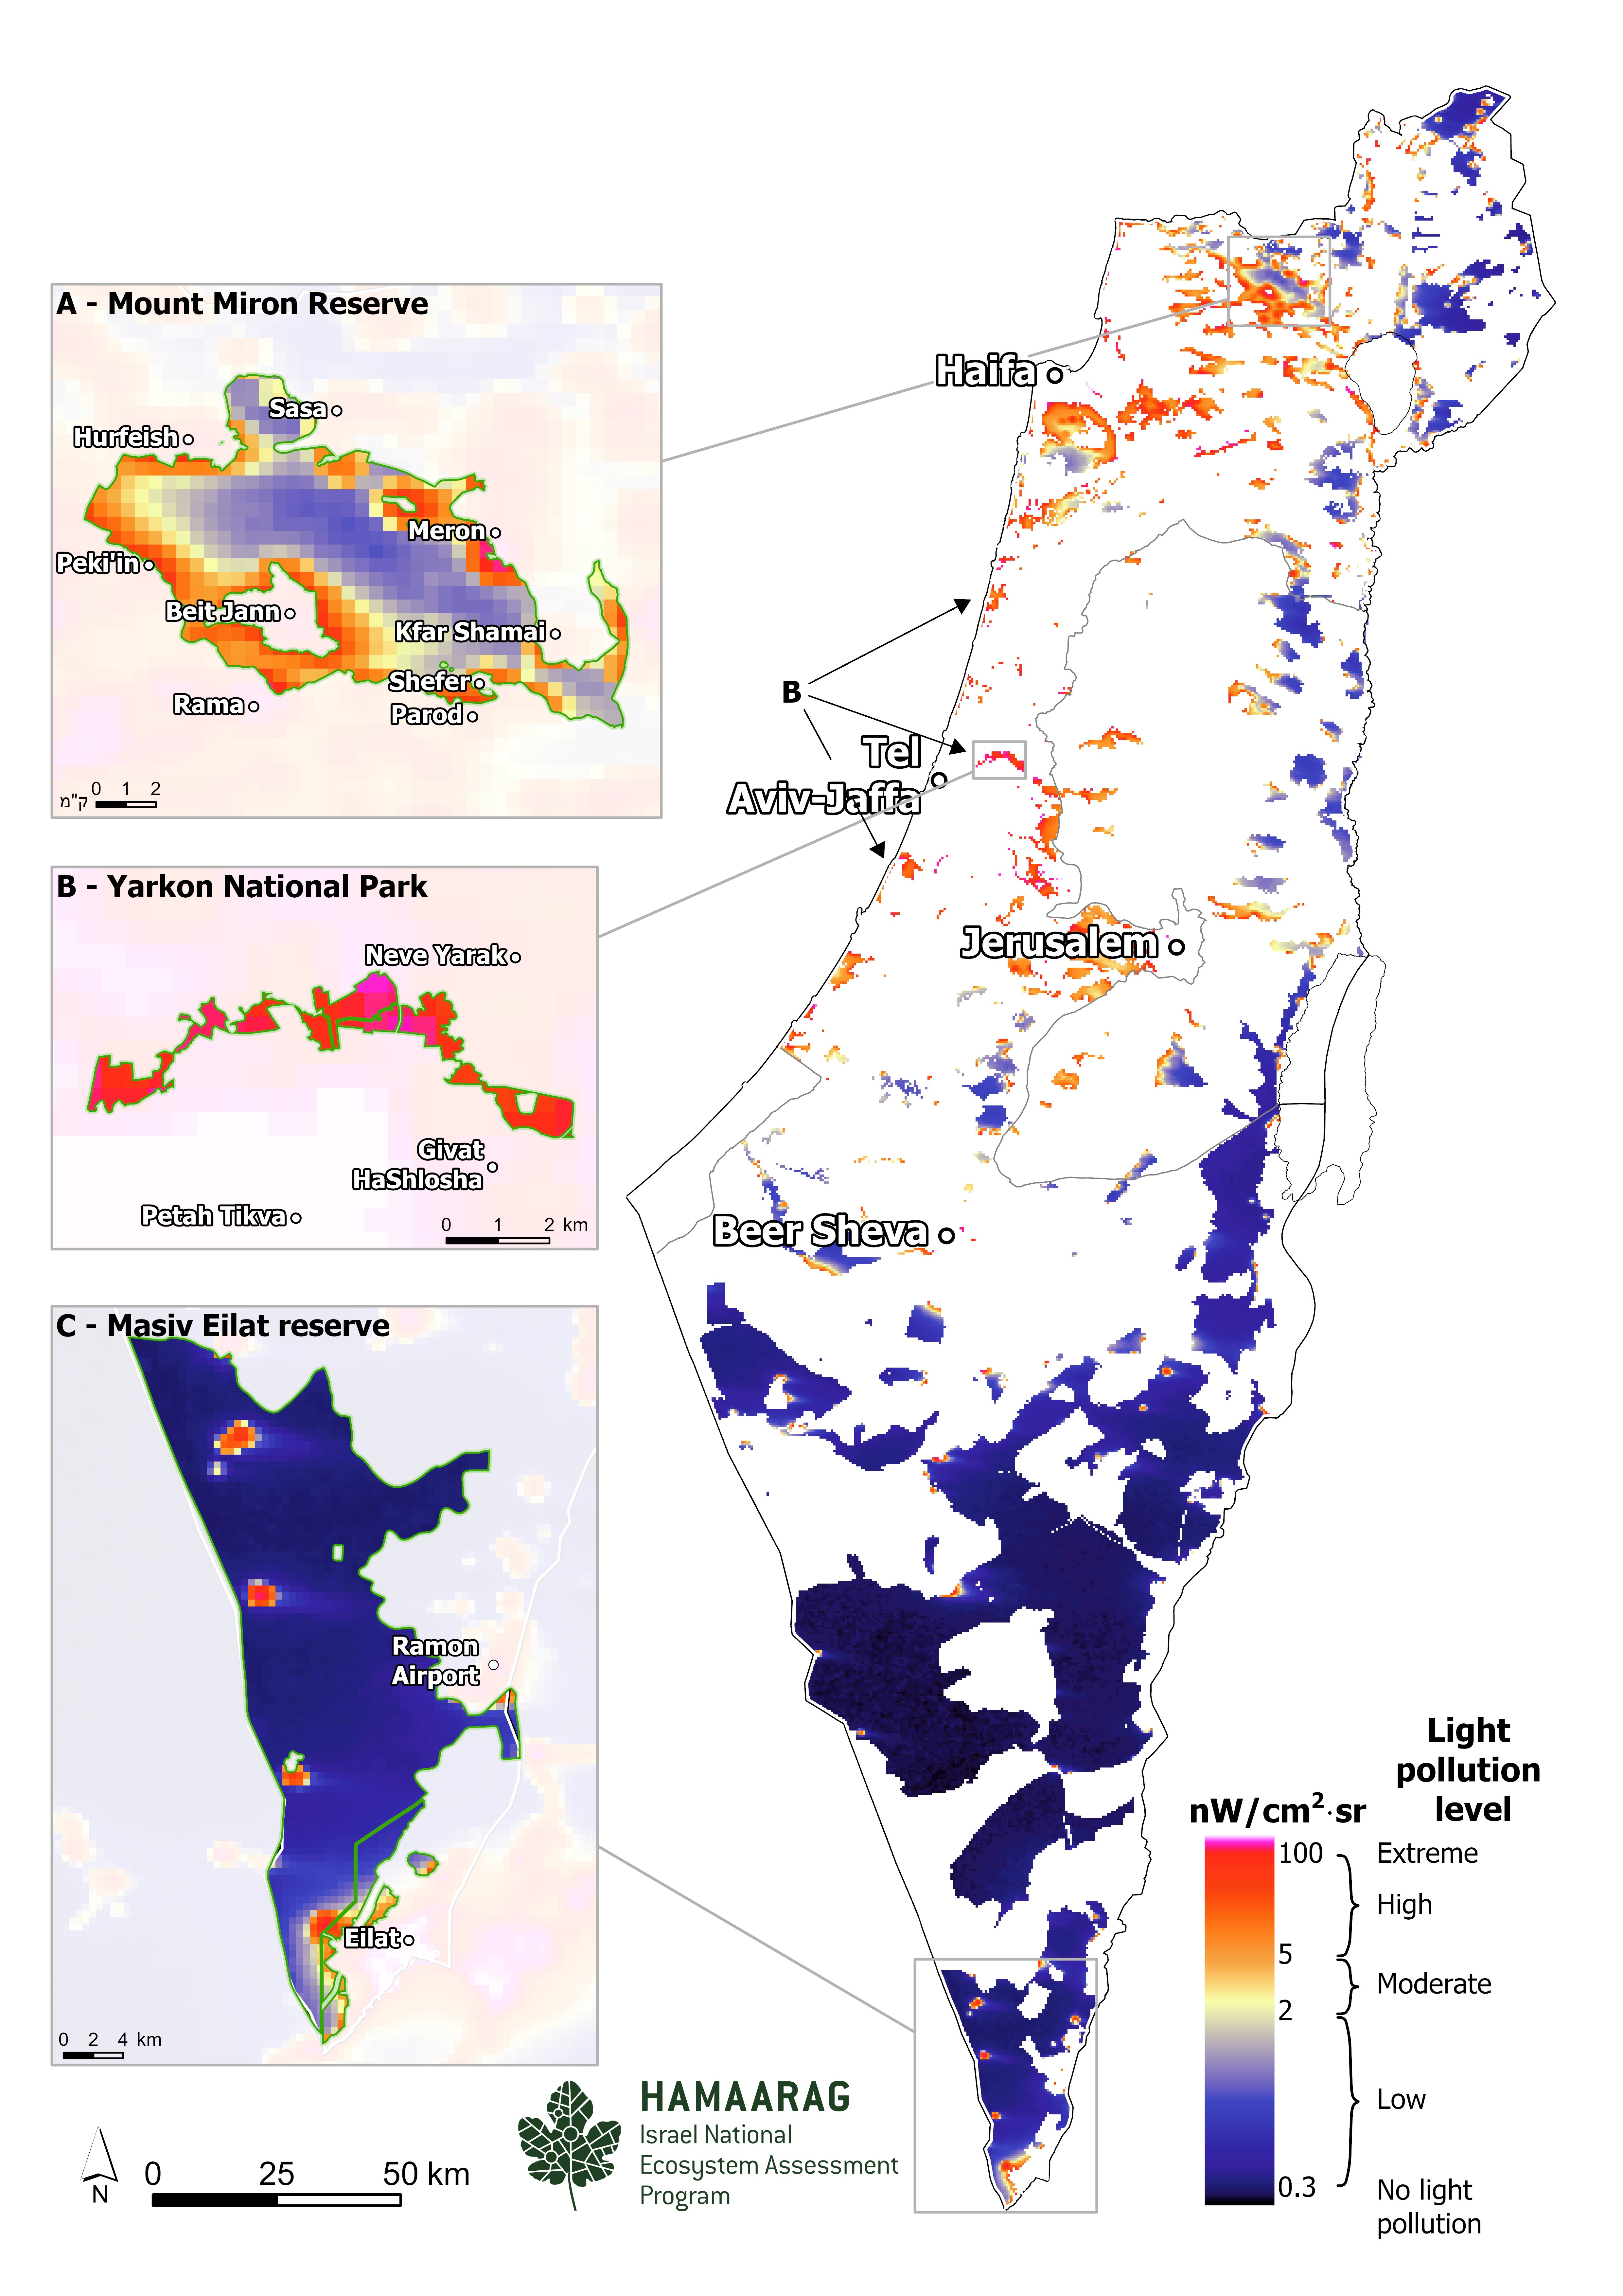 Light pollution intensities in natural reserves in Israel